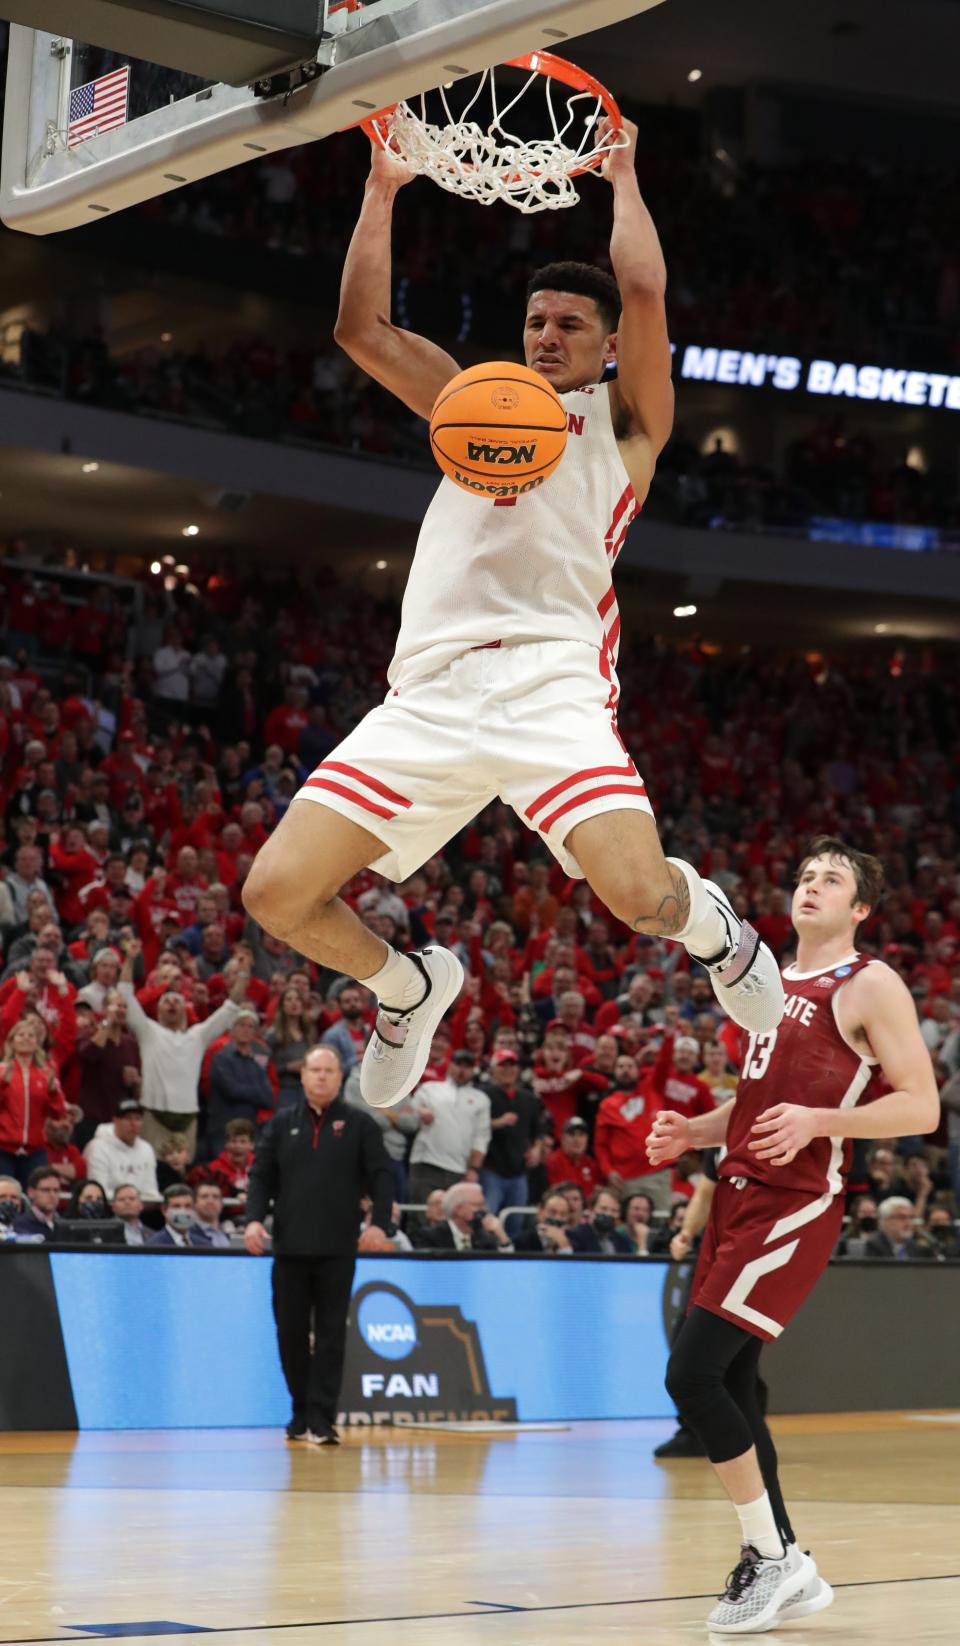 Johnny Davis was named Big Ten player of the year and then became a first-round NBA draft pick.